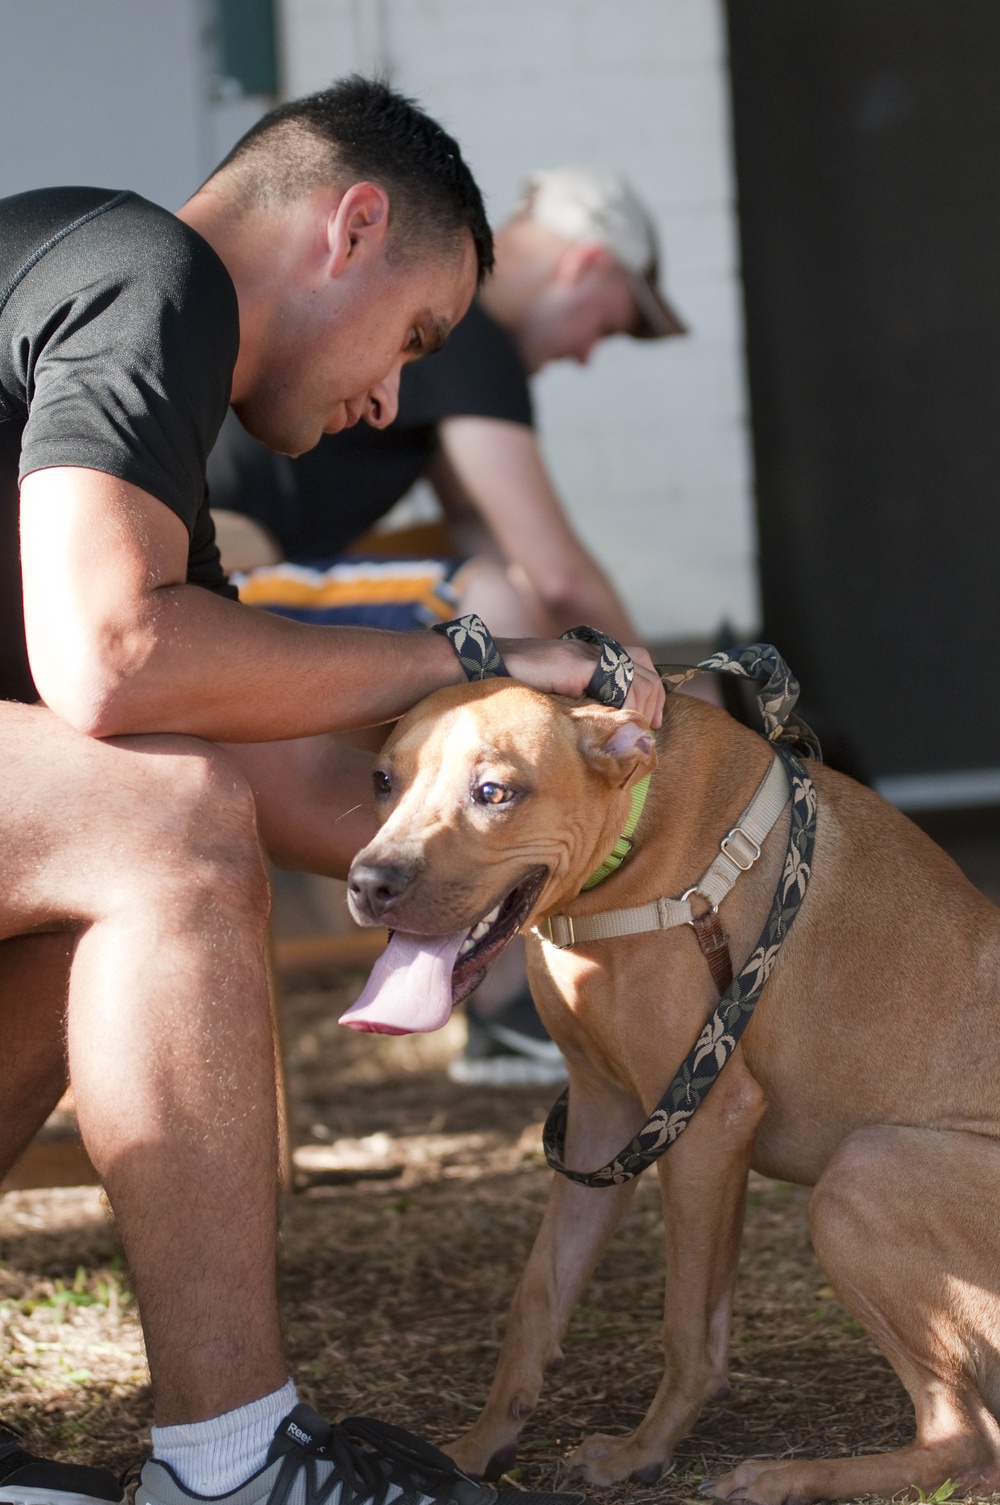 Marines, Sailors exercise, bond with dogs